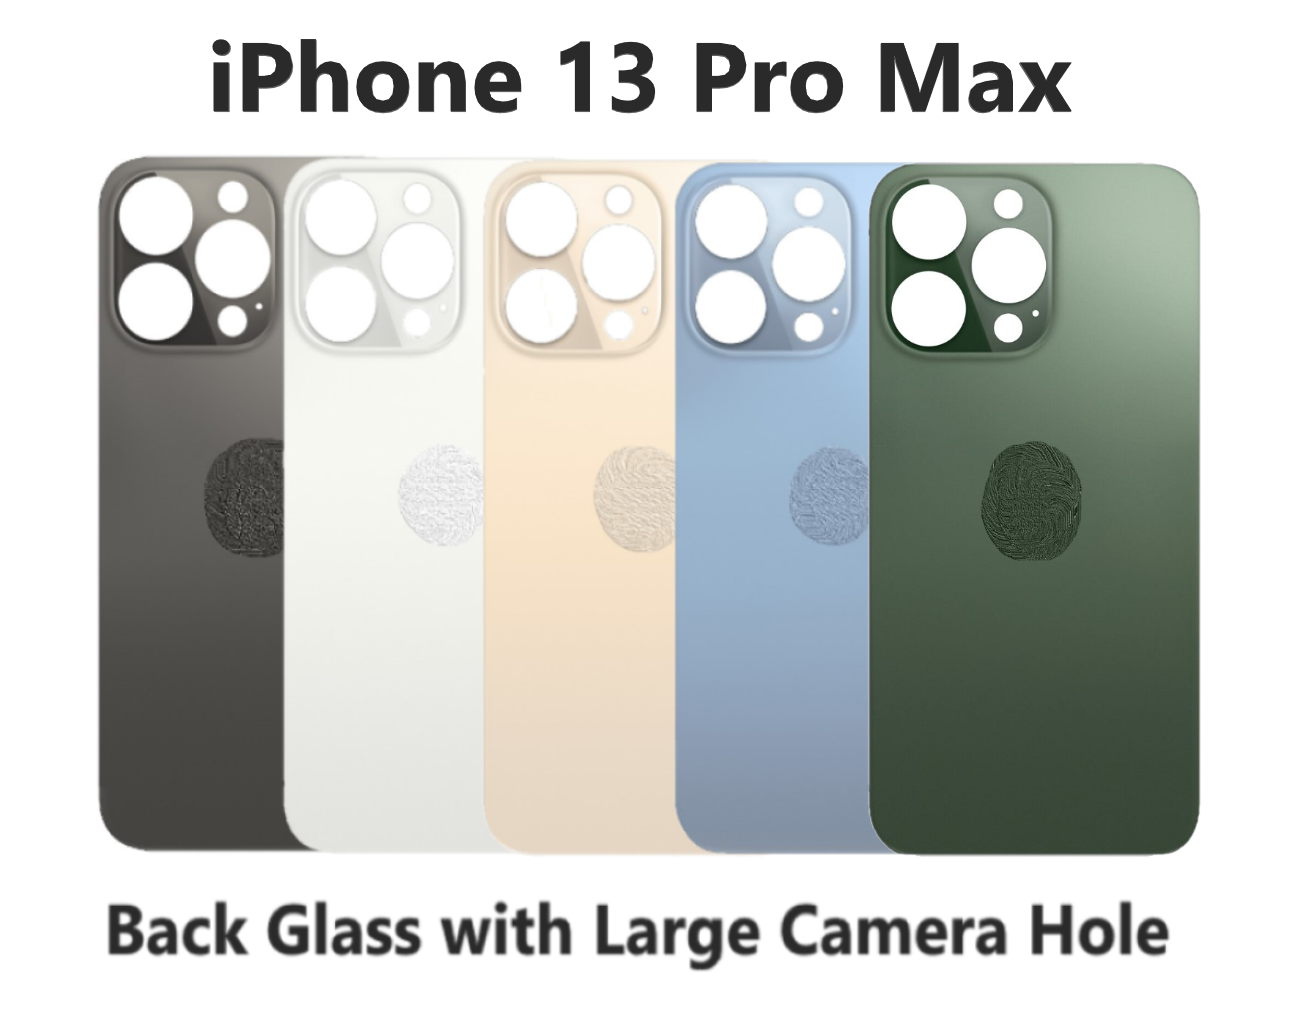 Professional Replacement Back Glass Rear Battery Cover for iPhone 13 Pro Max All Carriers supported (Big Camera Hole)